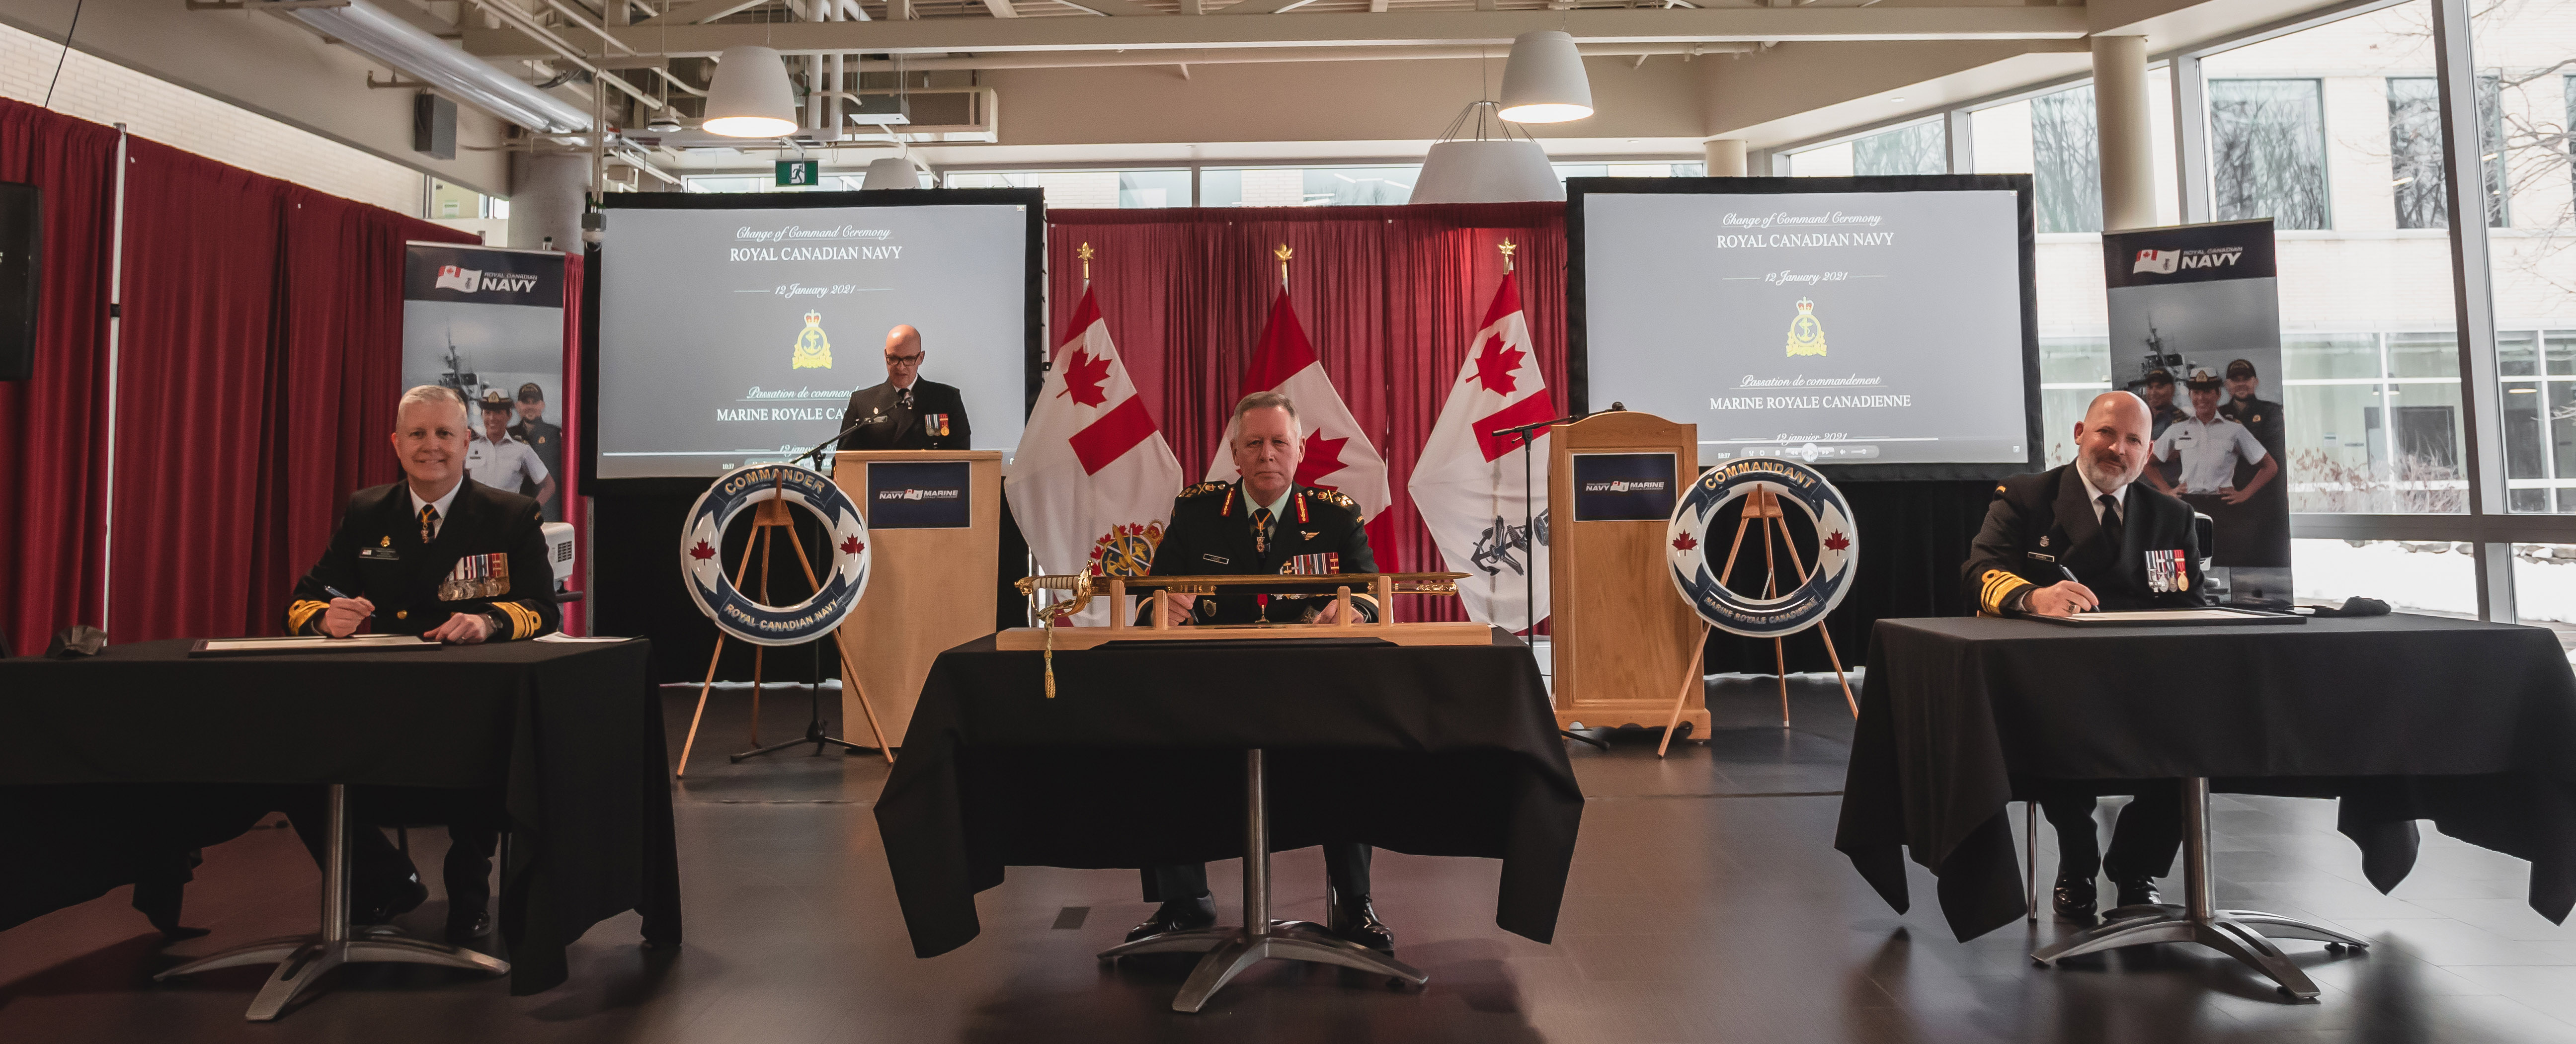 Commander Royal Canadian Navy change of command ceremony January 12